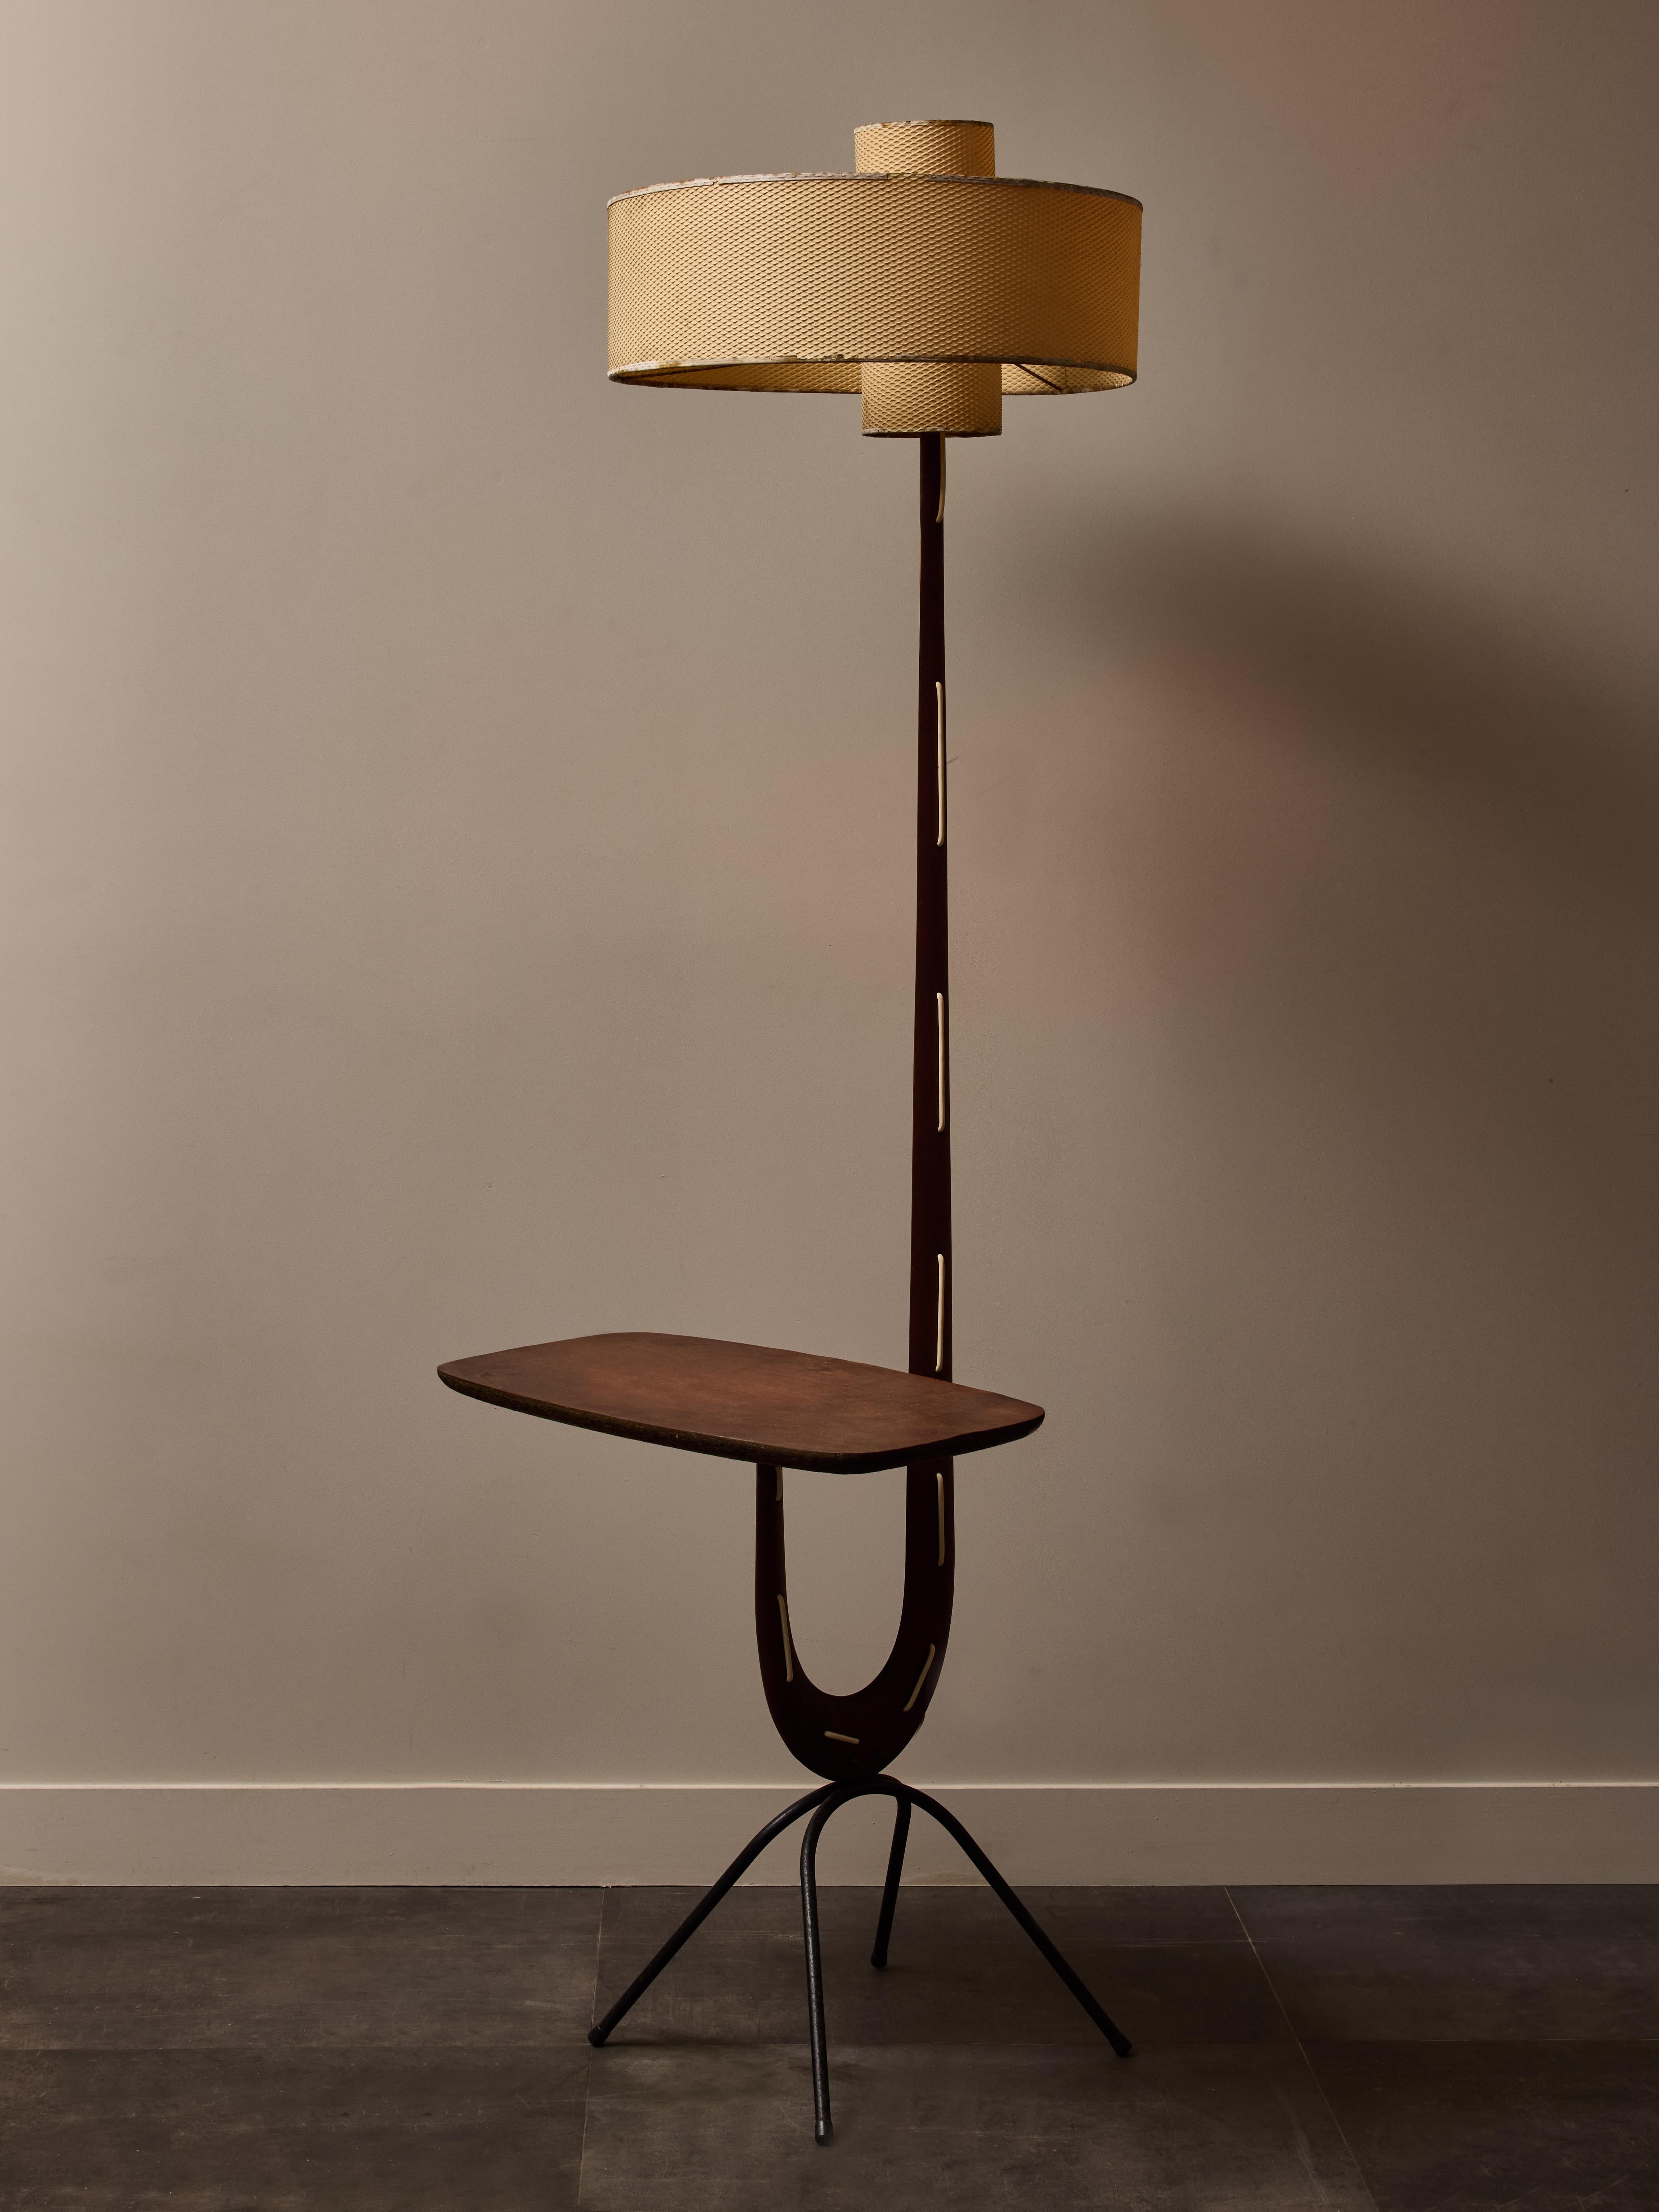 Girafe floor lamp designed and produced by Jean Rispal in the 1950s, made of wood and a two parts cellulose acetate lampshade. It is also equipped of a small integrated table, metal feet and a noticeable feature is the electric cable threaded in